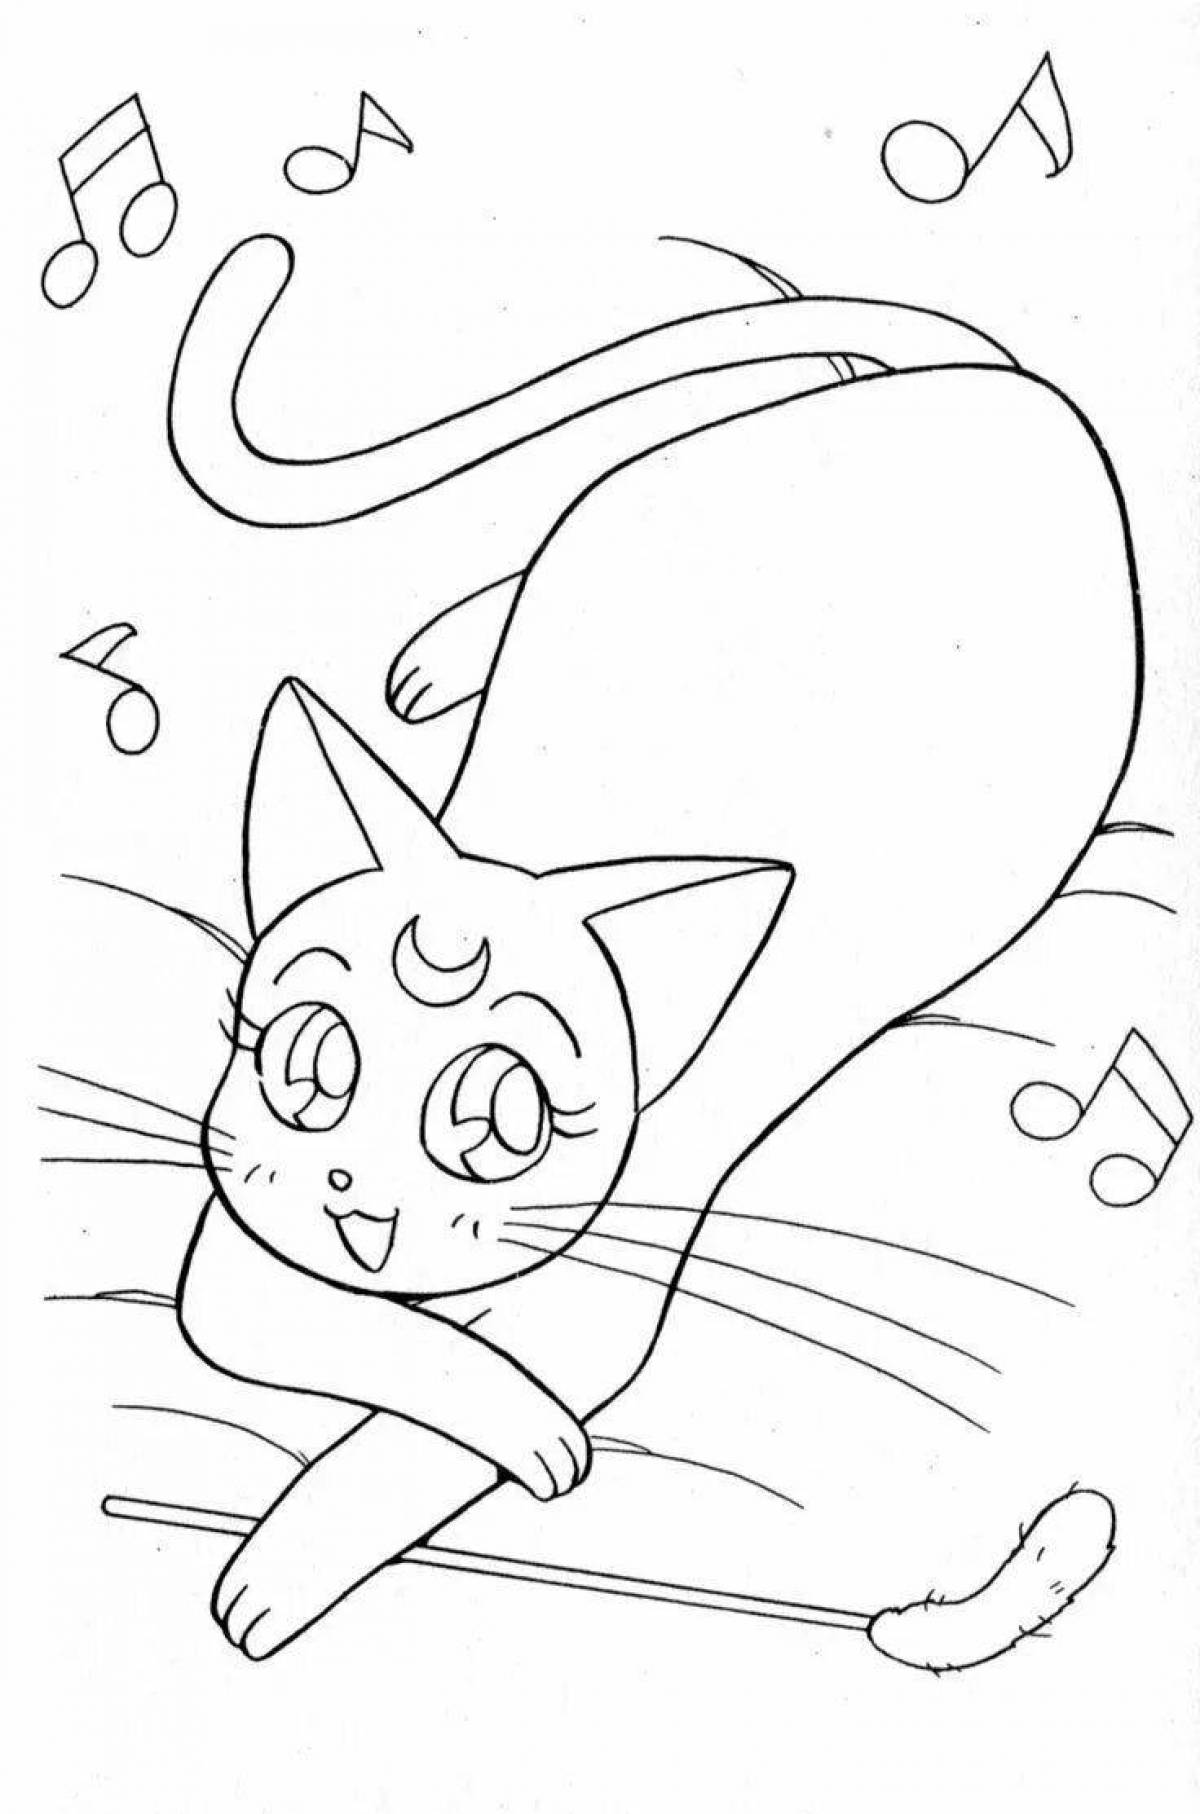 Coloring book fluffy anime kittens